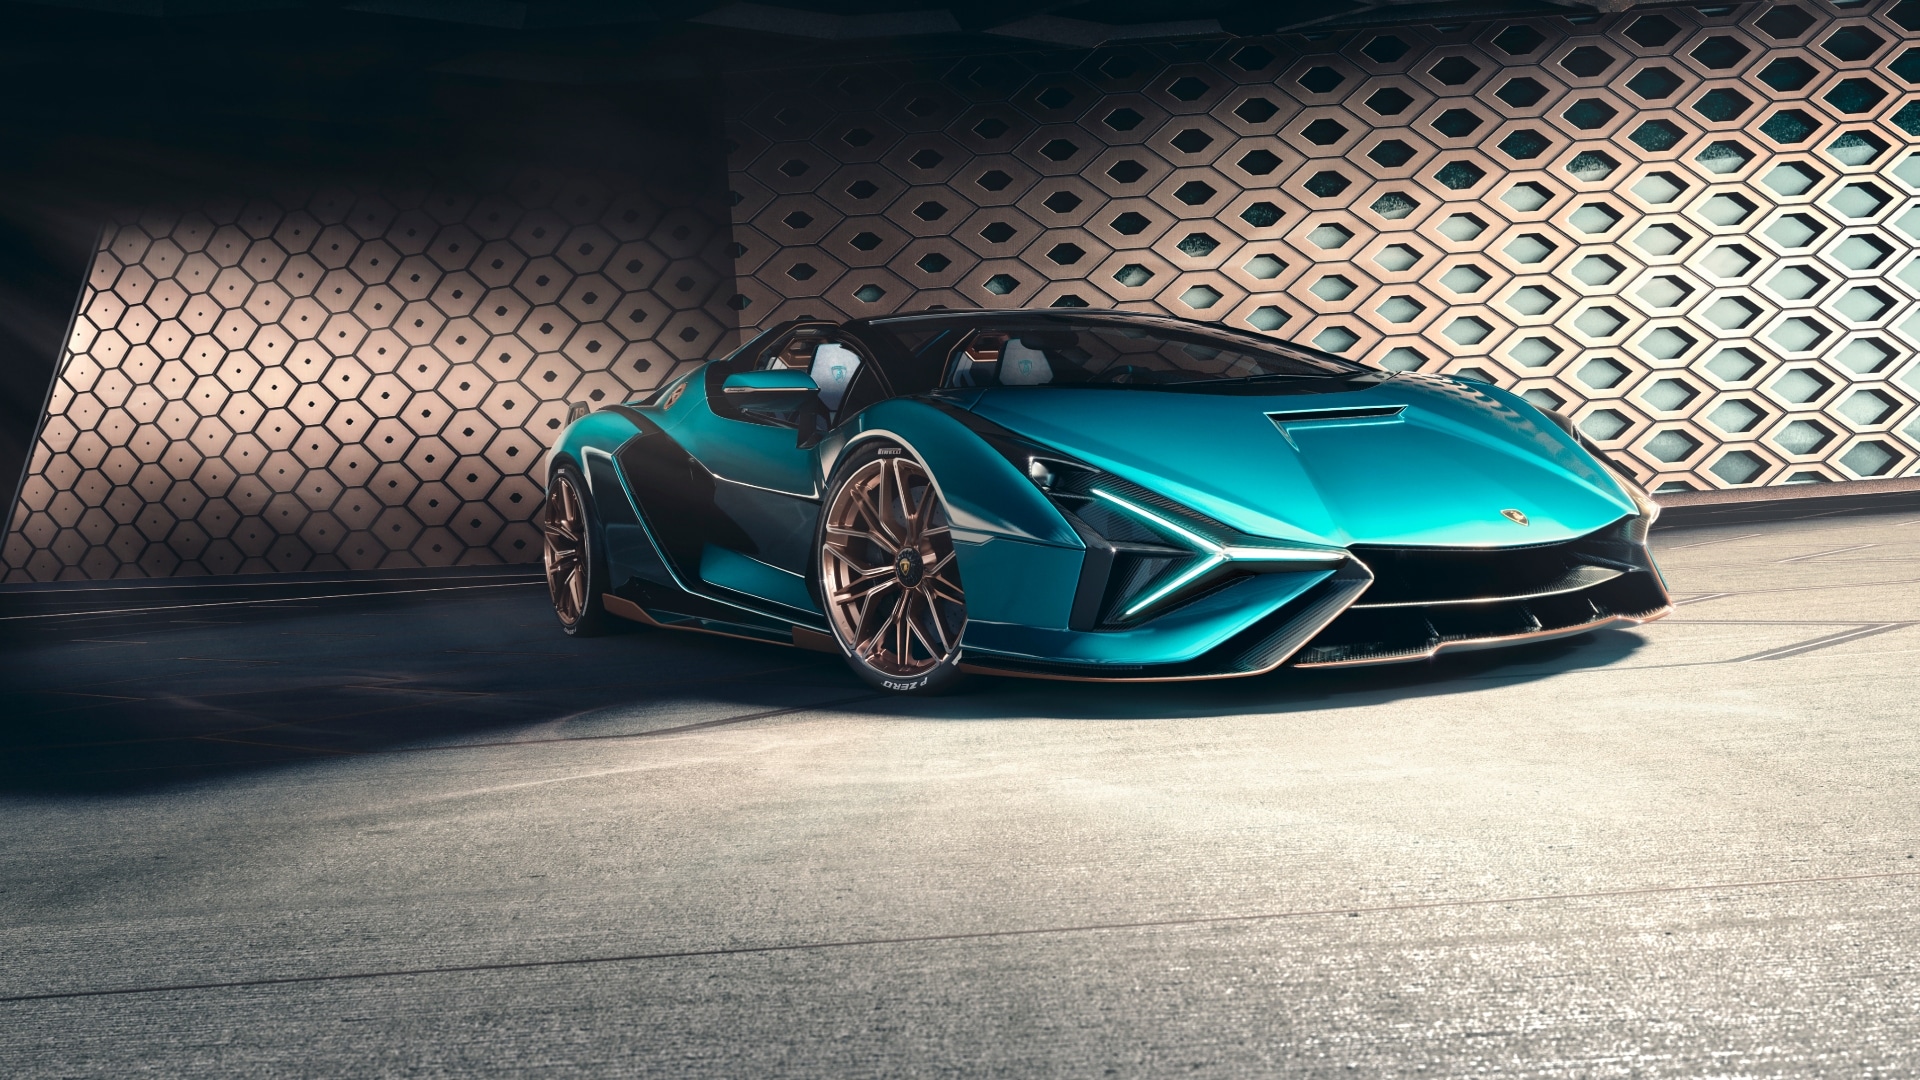 Lamborghini Sián Roadster - Technical Specifications, Pictures, Videos